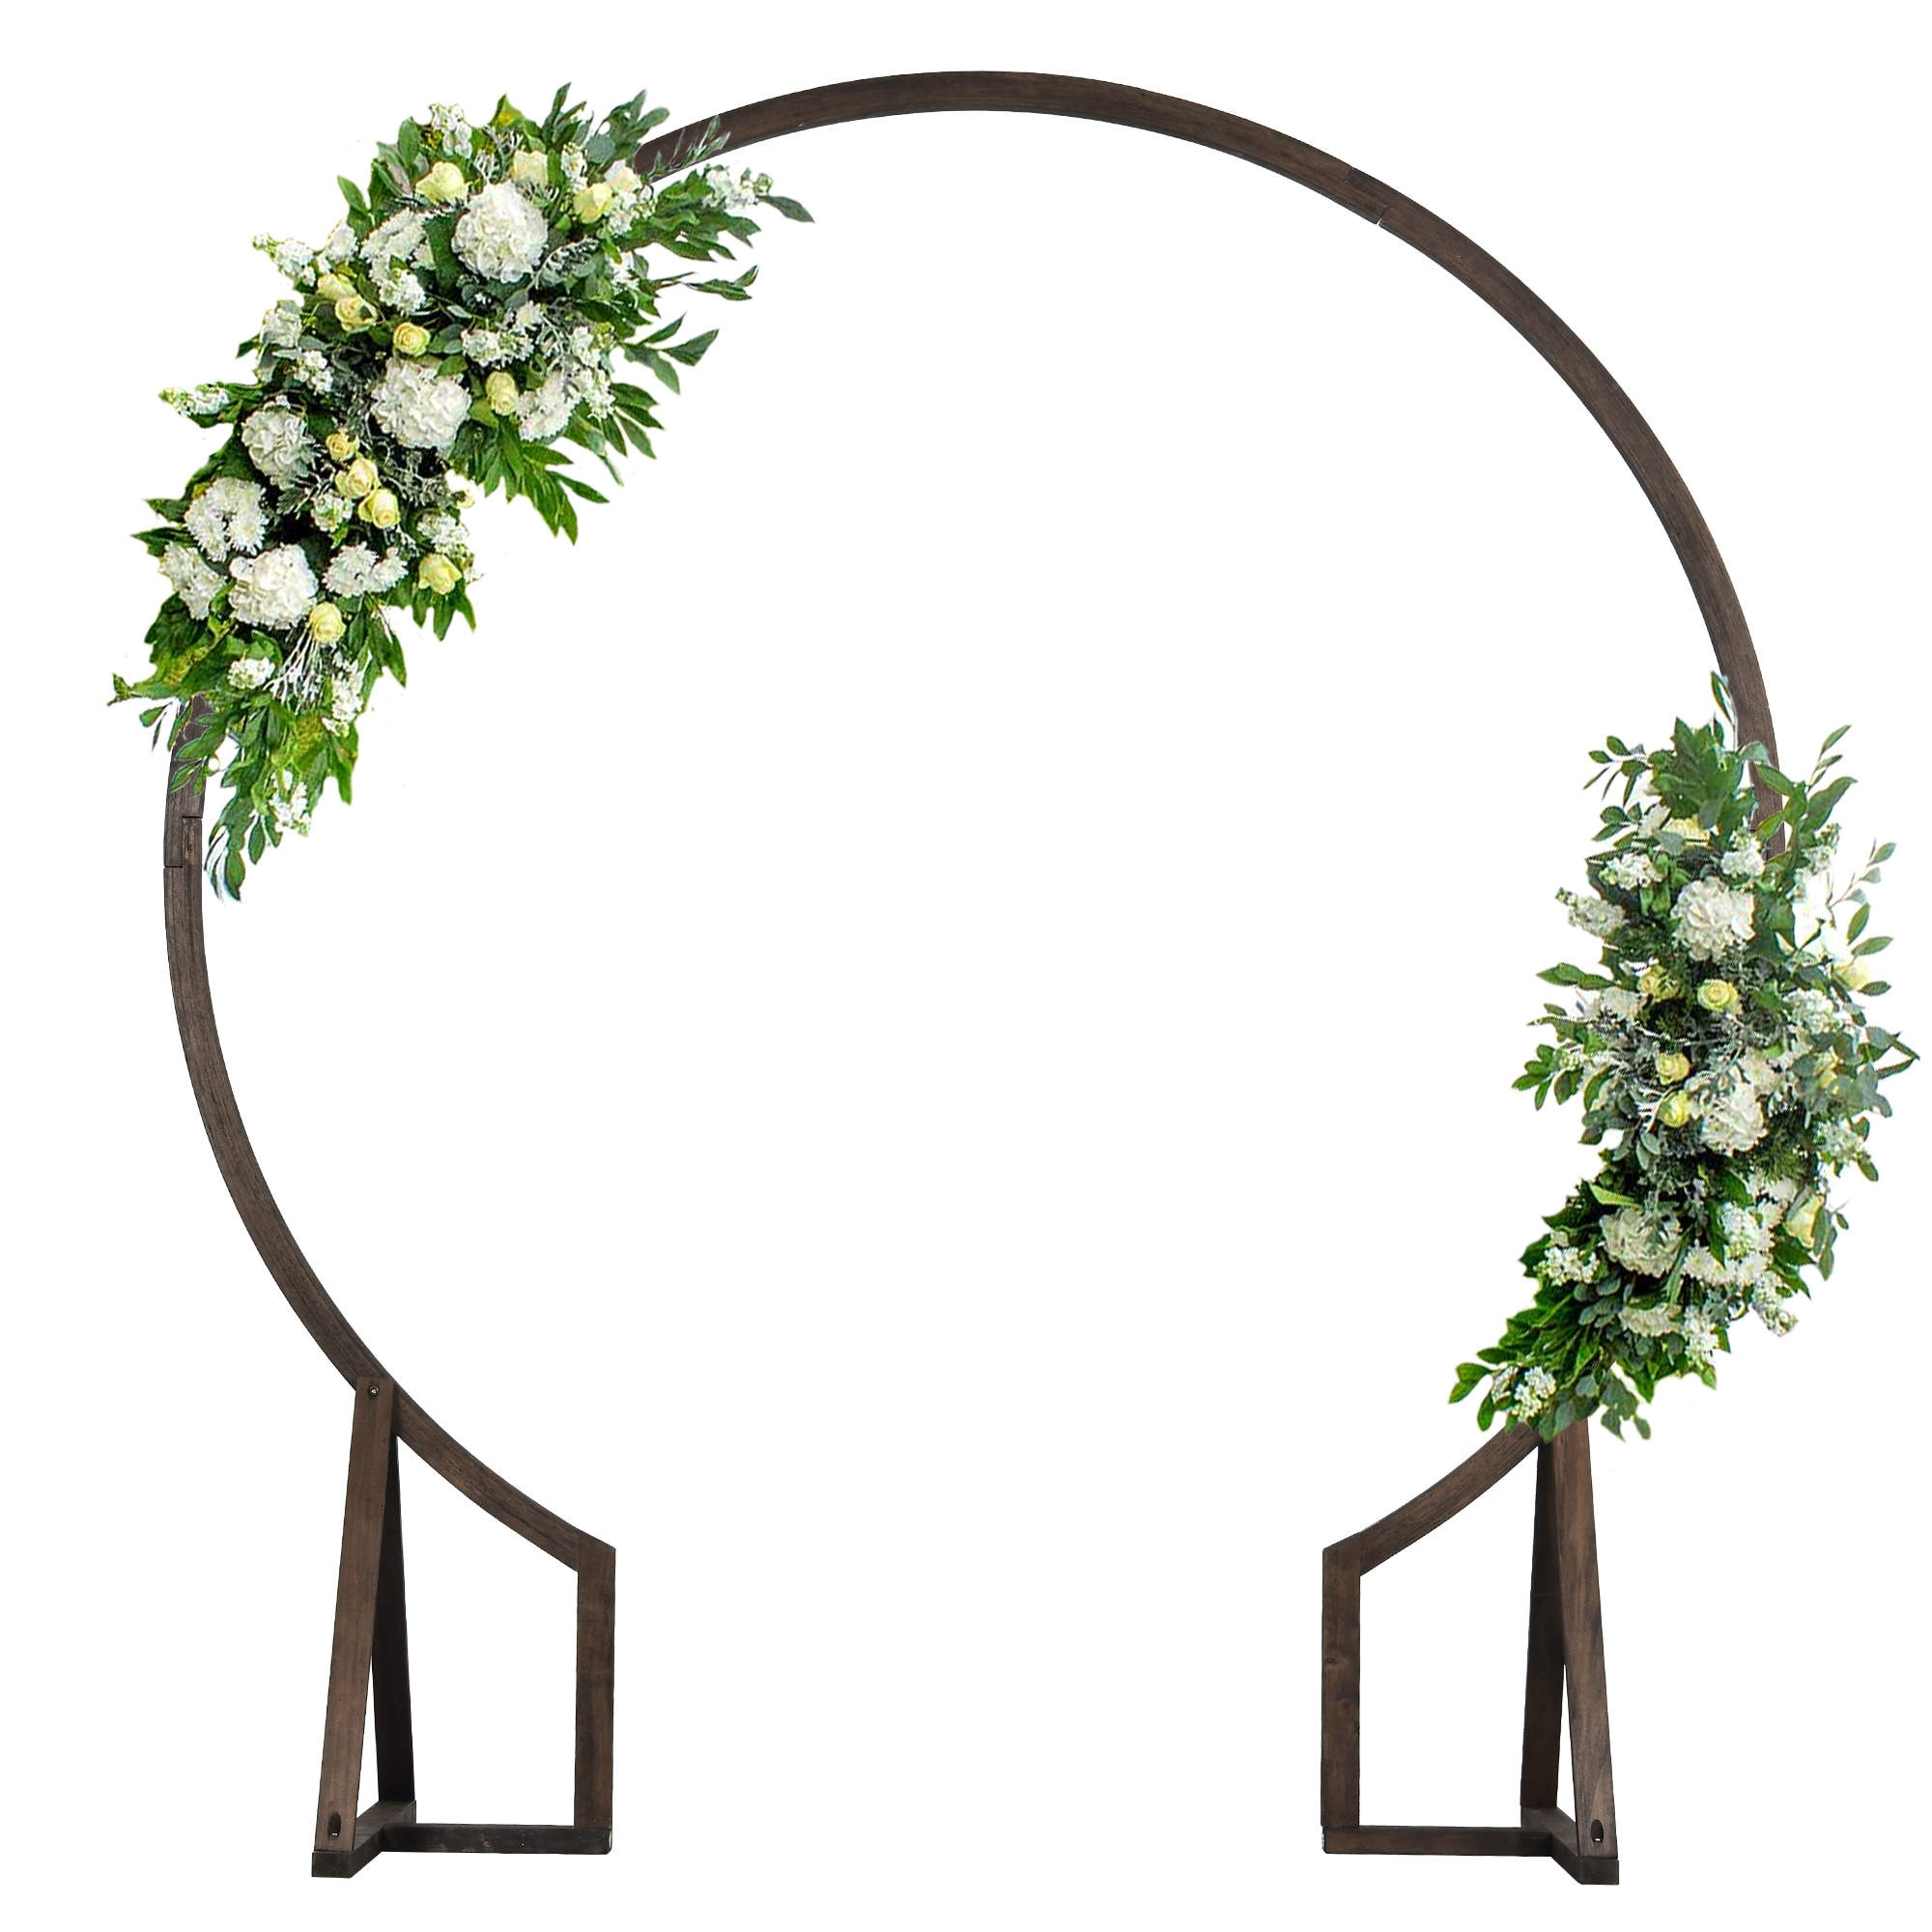 Moasis Round Solid Wood Wedding Arch Frame Garden Arbor Flowers Backdrop Stand